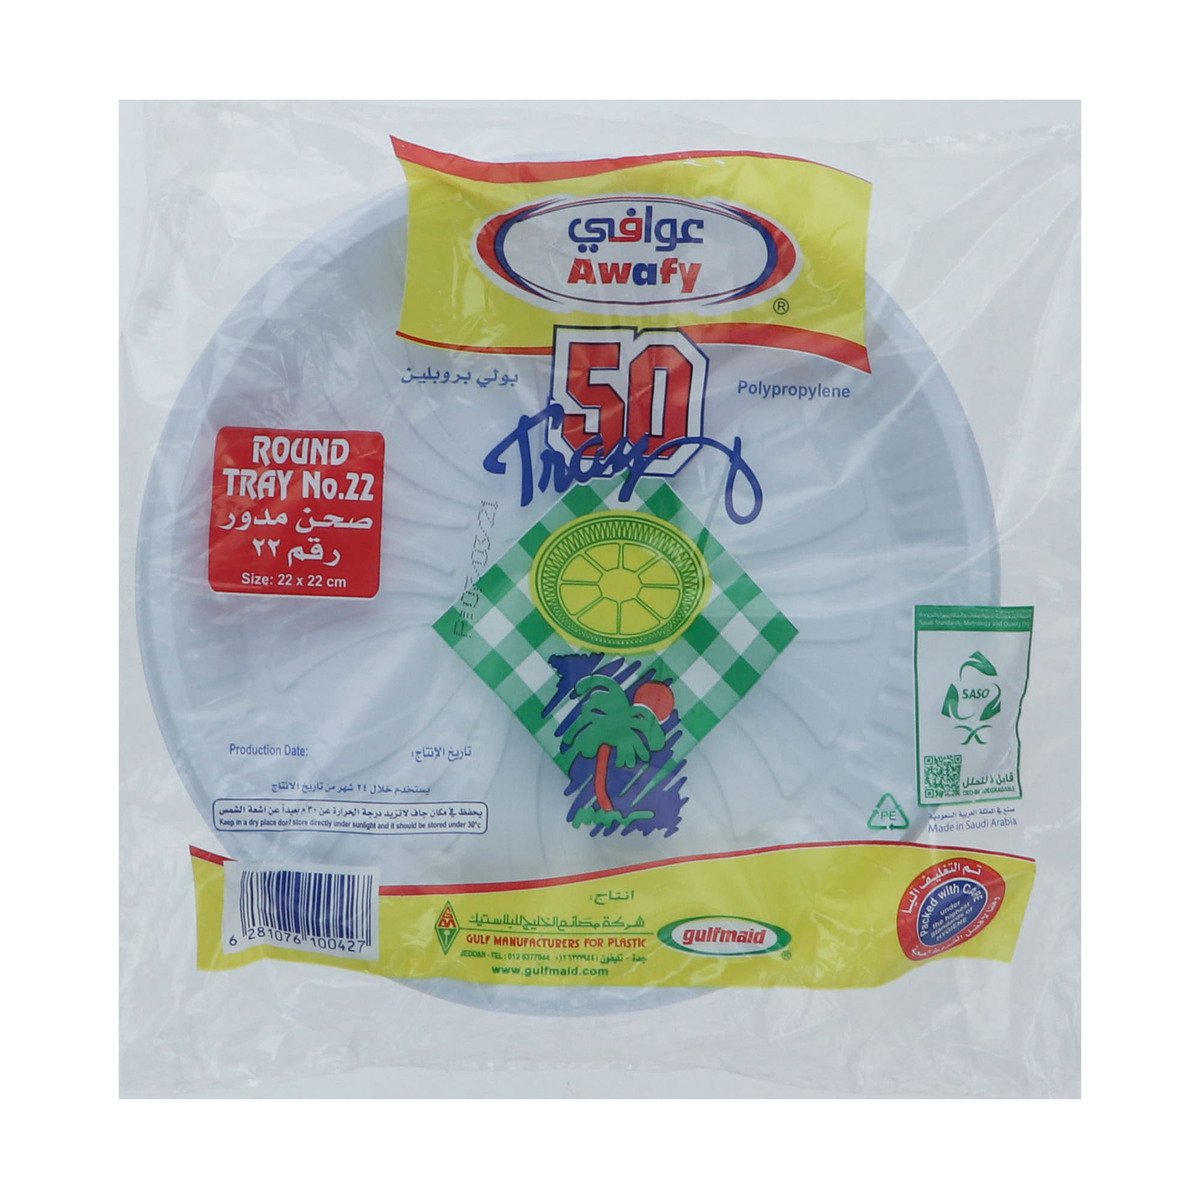 Gulfmaid Disposable Round Tray No.22 Size 22 x 22cm 50pcs